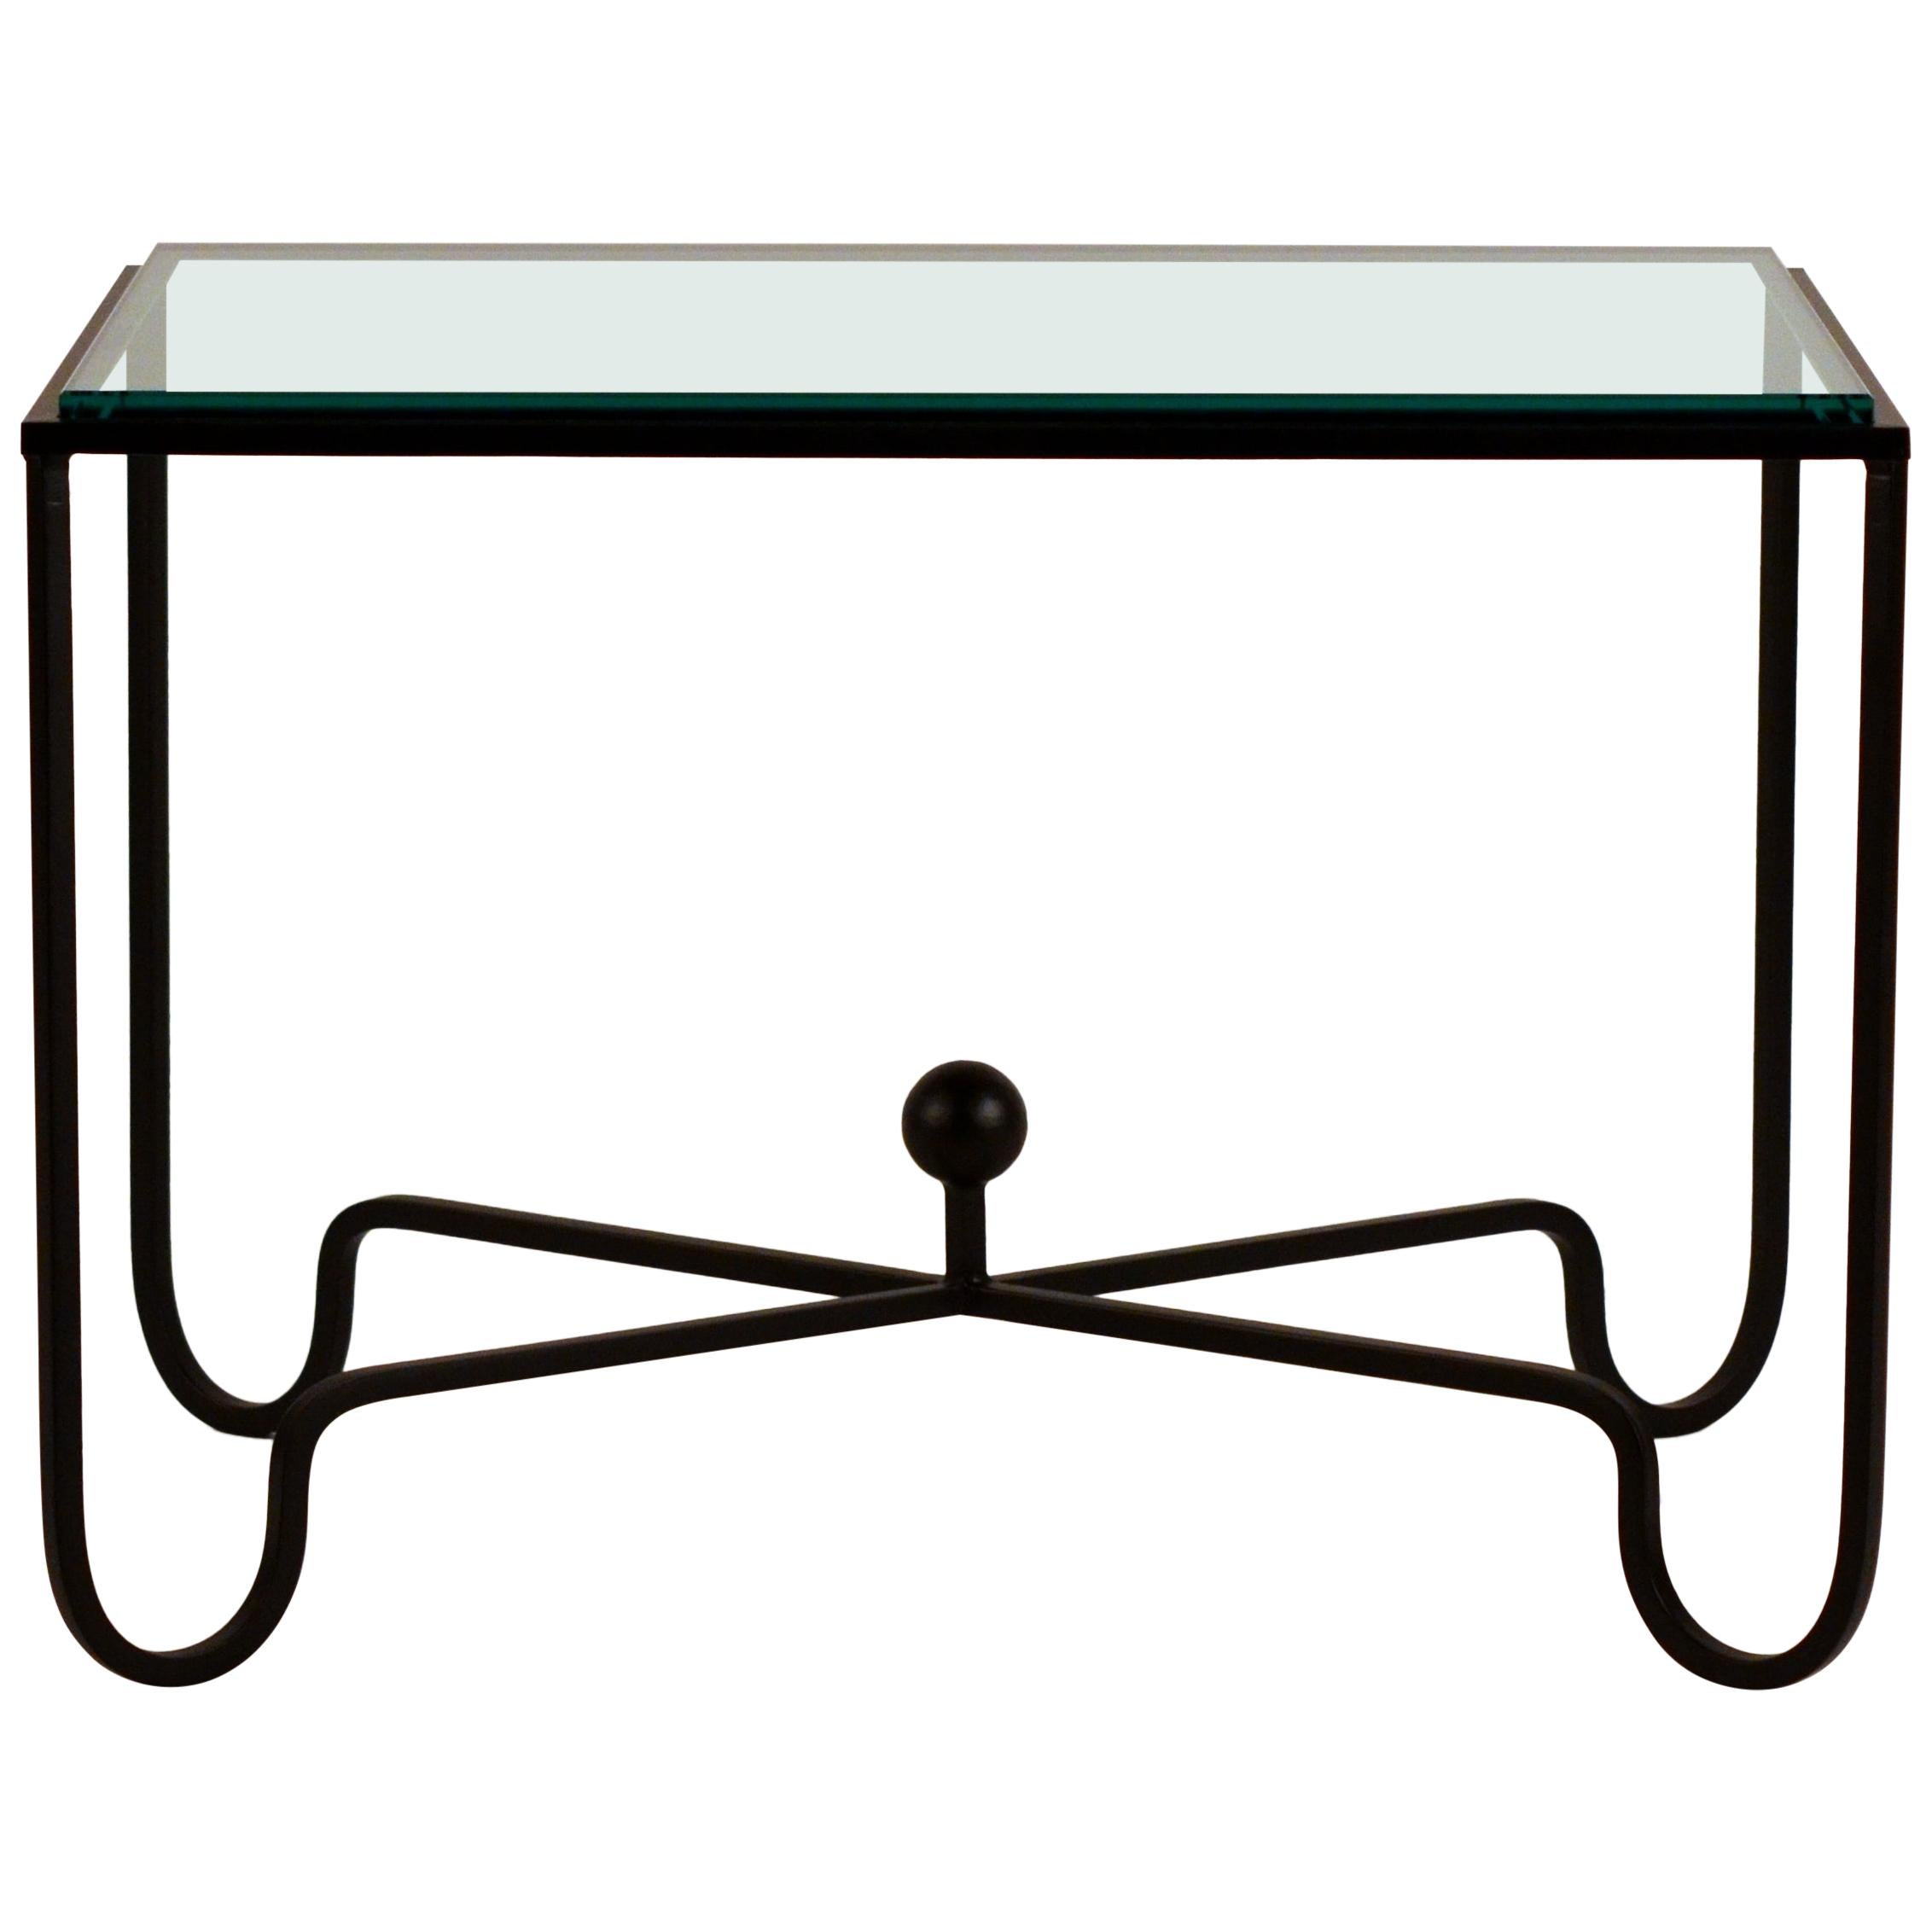 Chic Blackened Steel and Glass 'Entretoise' Side Table by Design Frères For Sale